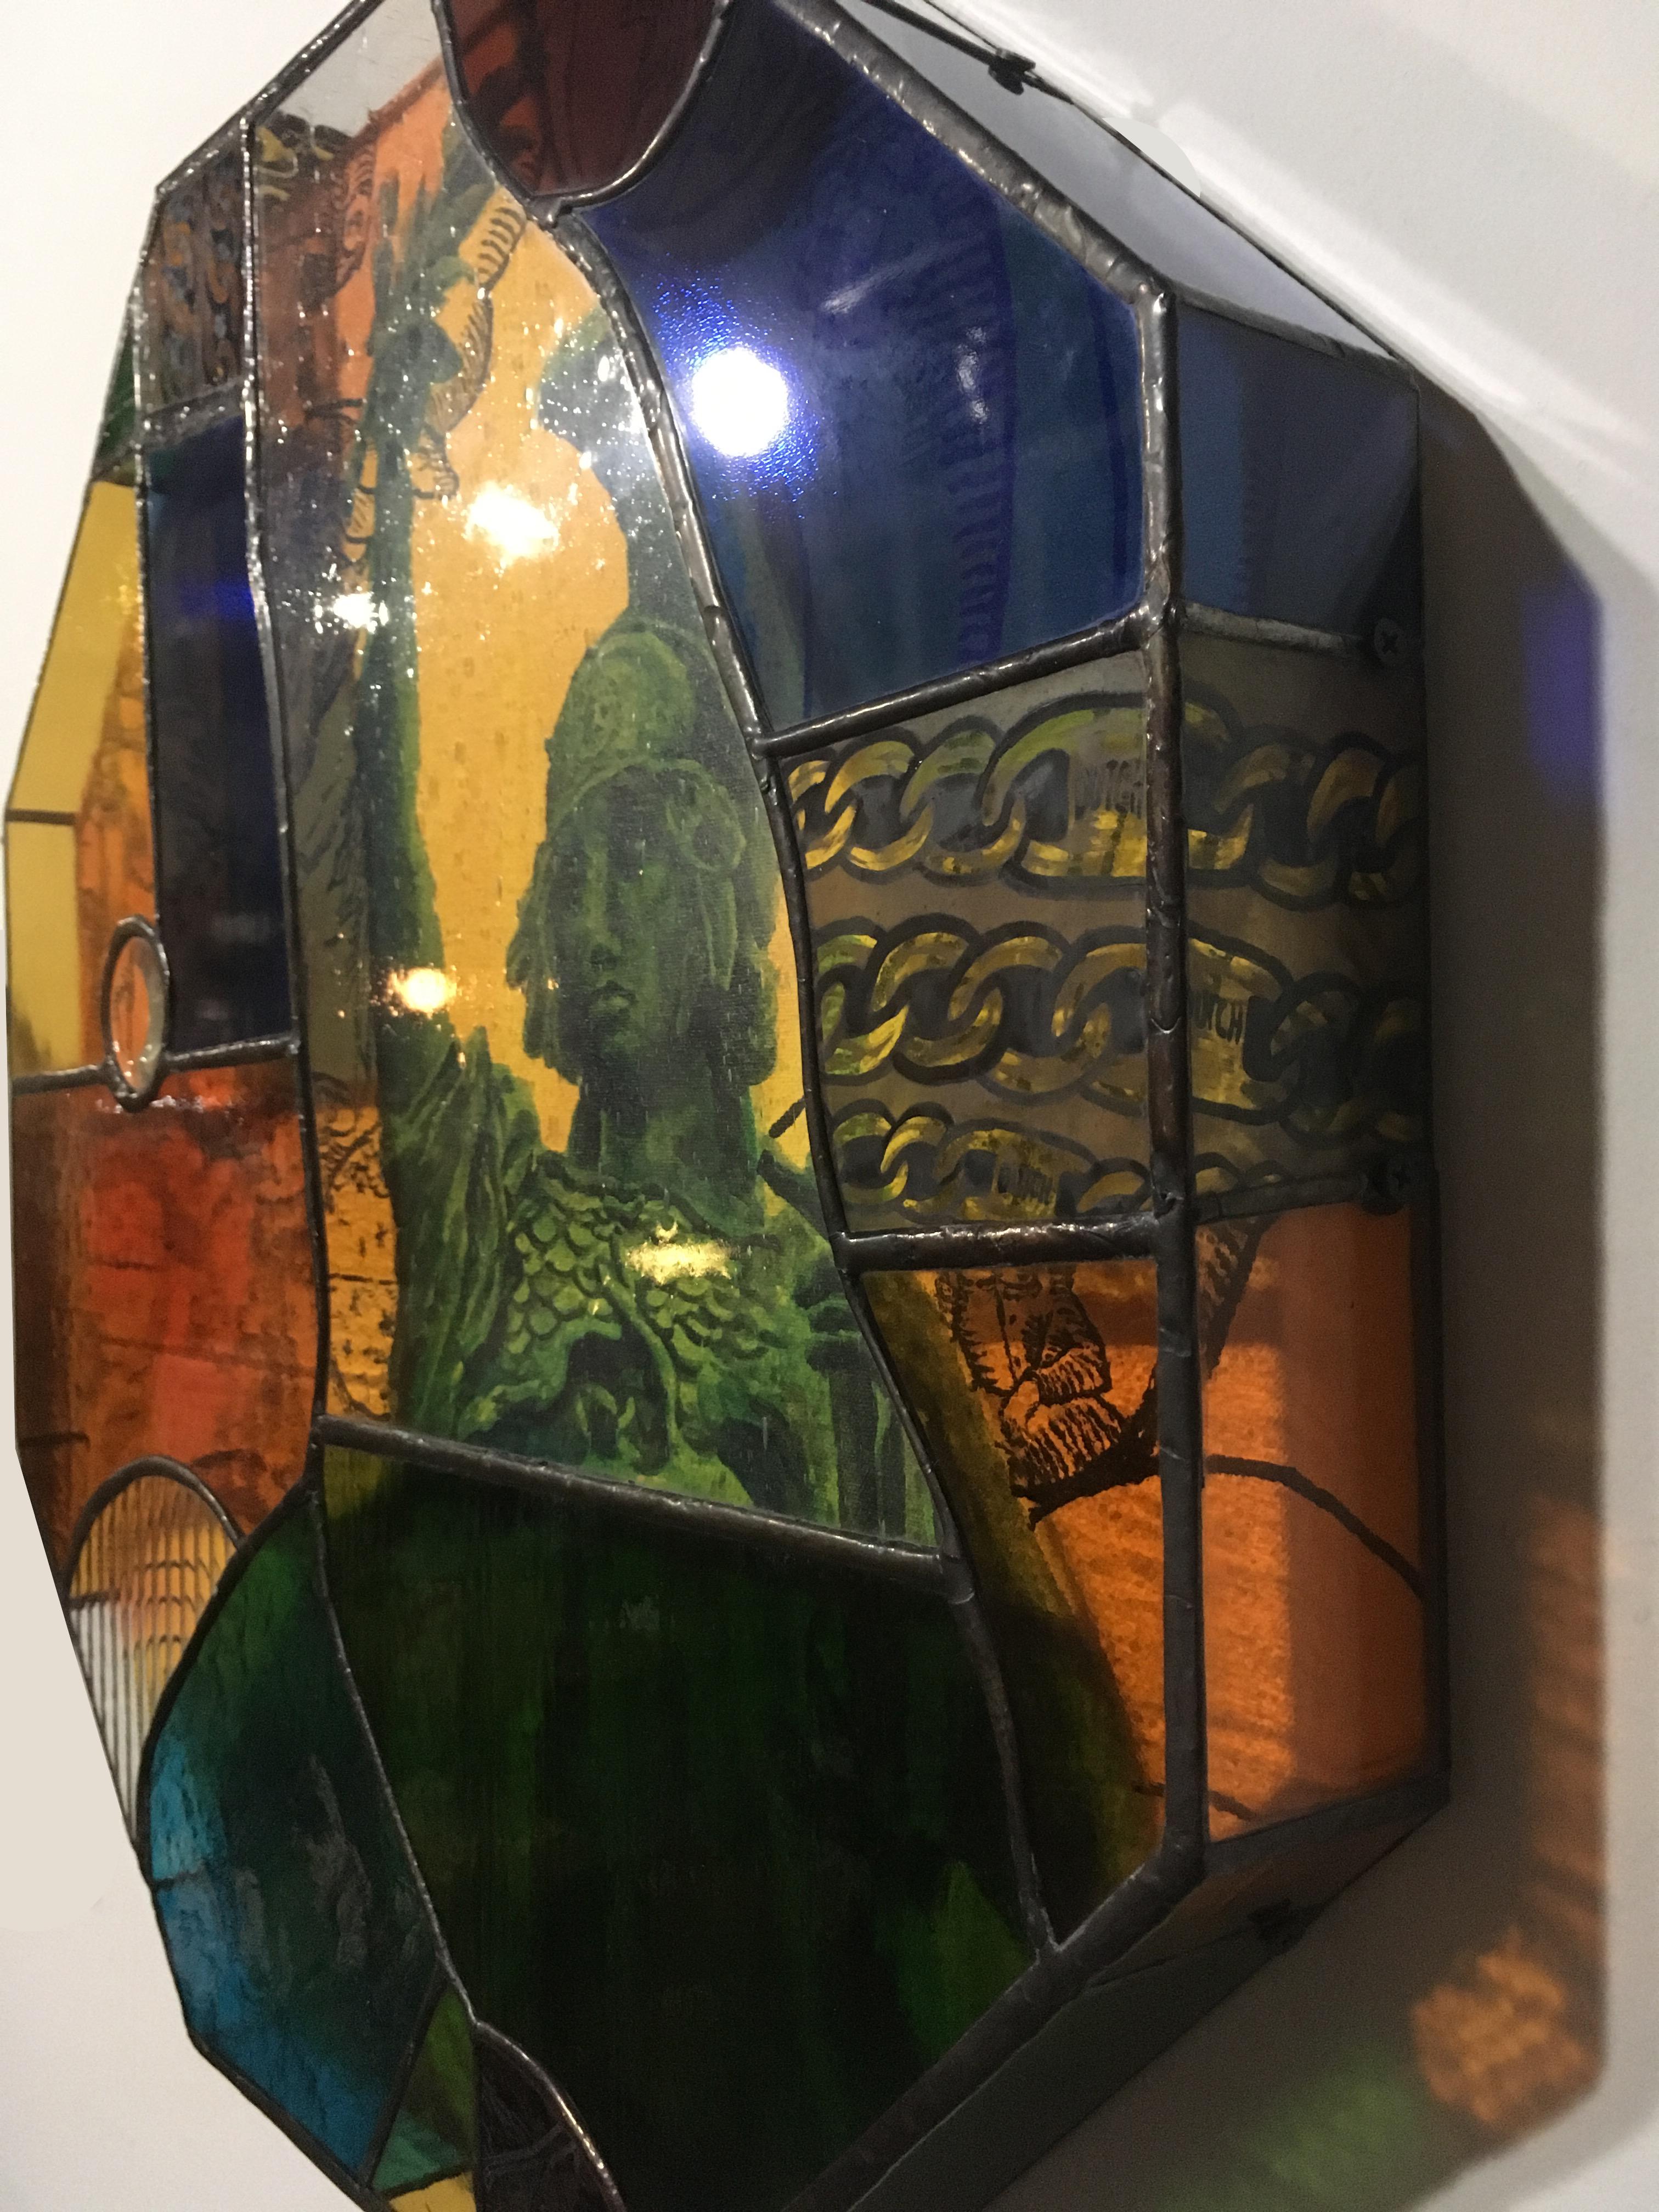 Earth People, a unique stained glass shadowbox handmade by TF Dutchman, contains an acrylic painting on canvas set in a stained glass box.  The canvas is a portrait of a statue with alchemy imagery. The brilliant orange, blue, green and yellow glass